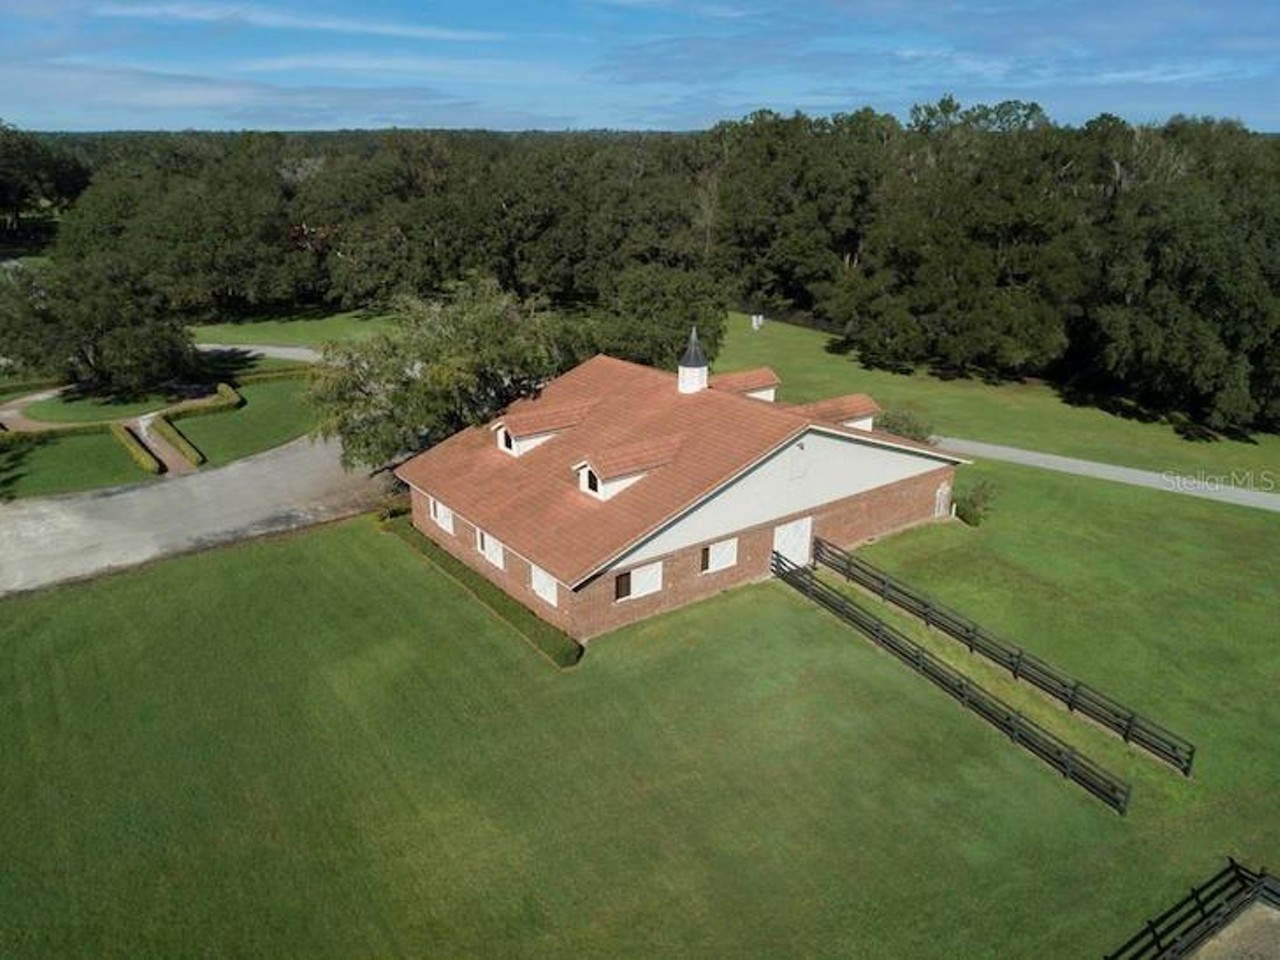 A 200-acre Ocala compound owned by the Waldrep family is now for sale